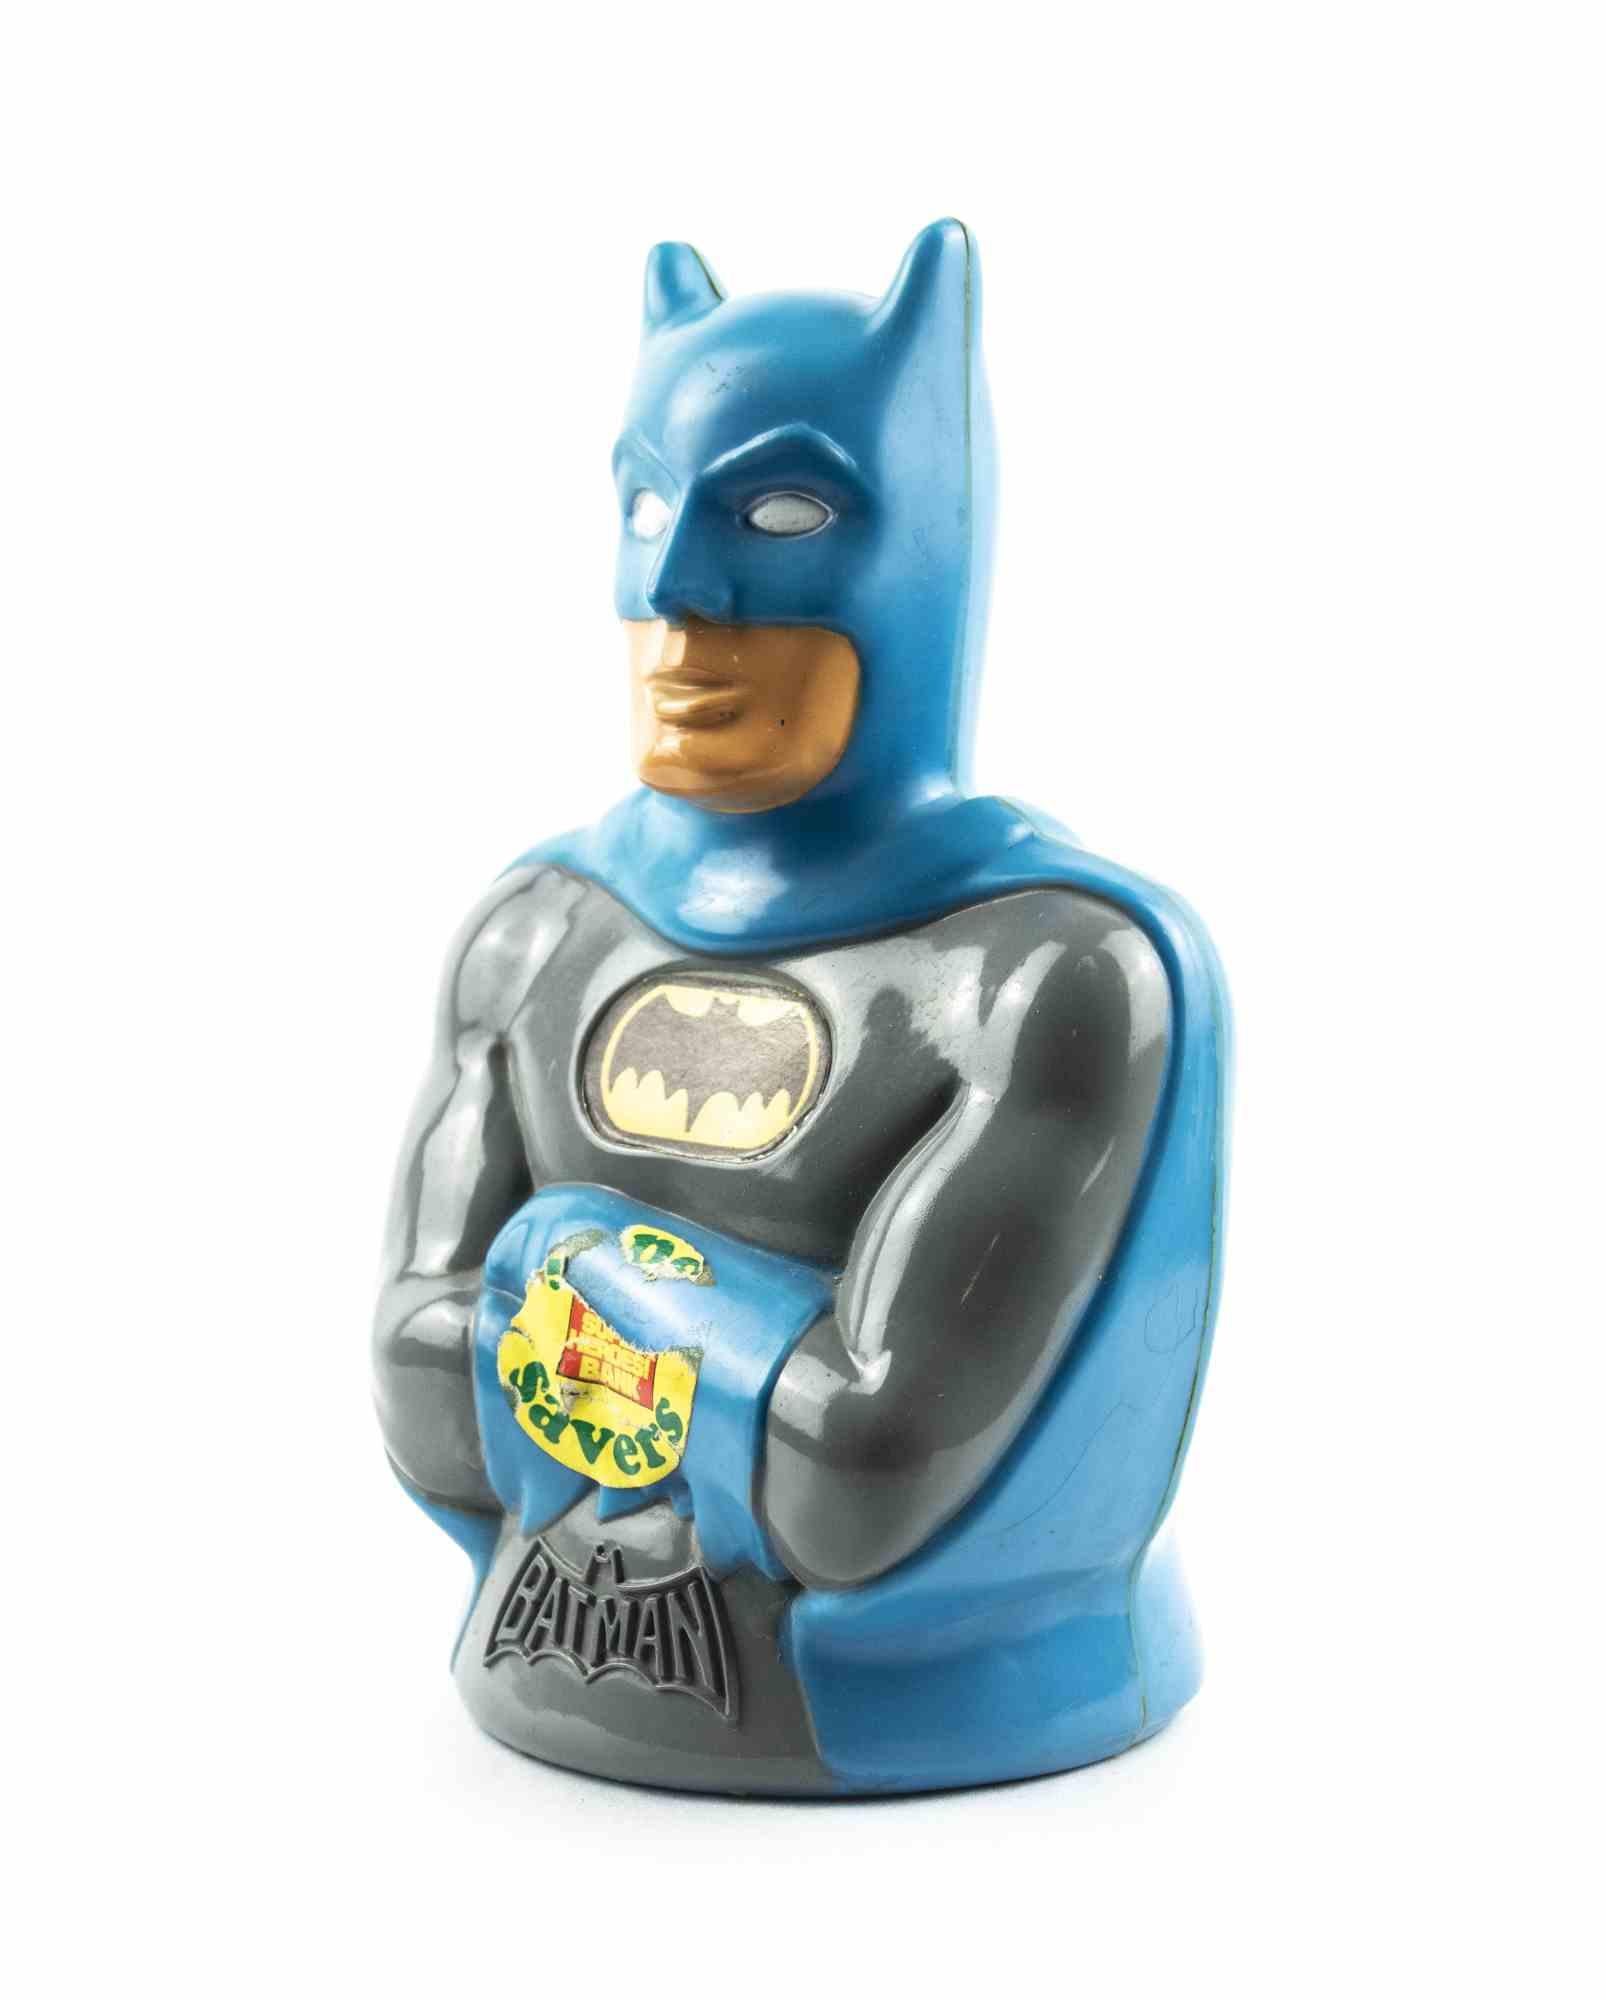 Batman money saver is an original decorative object realized in the 1970s..

This unique object is a vintage money saver in the shape of the super hero Batman realized in the USA.

Original label (not in good conditions) in the center.

Good